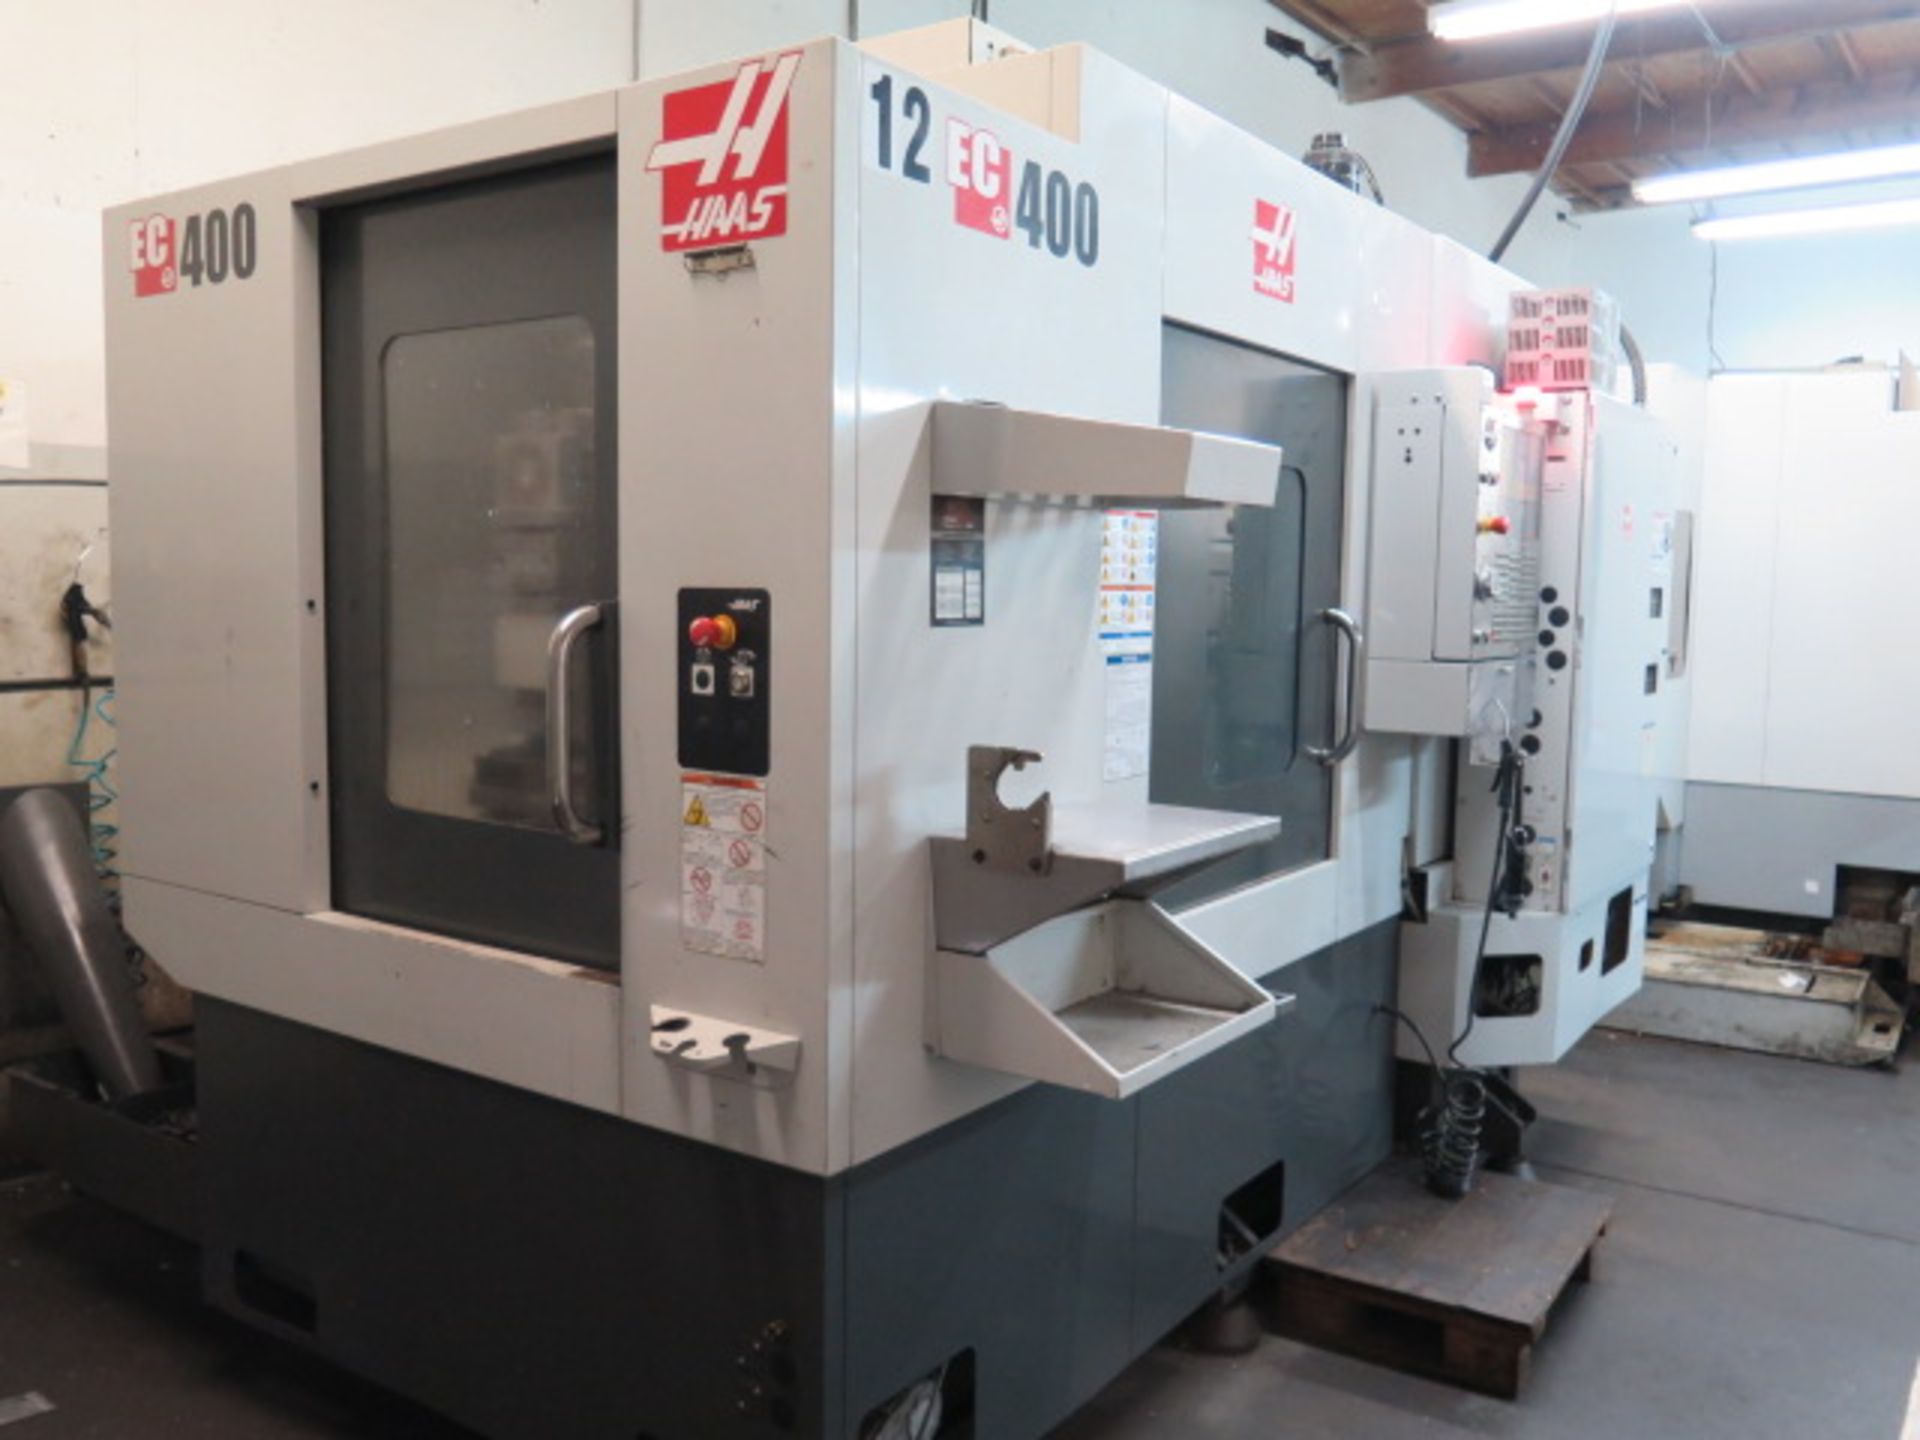 Ultra Precision “HAAS” CNC Machining & Turning Facility - Image 13 of 18